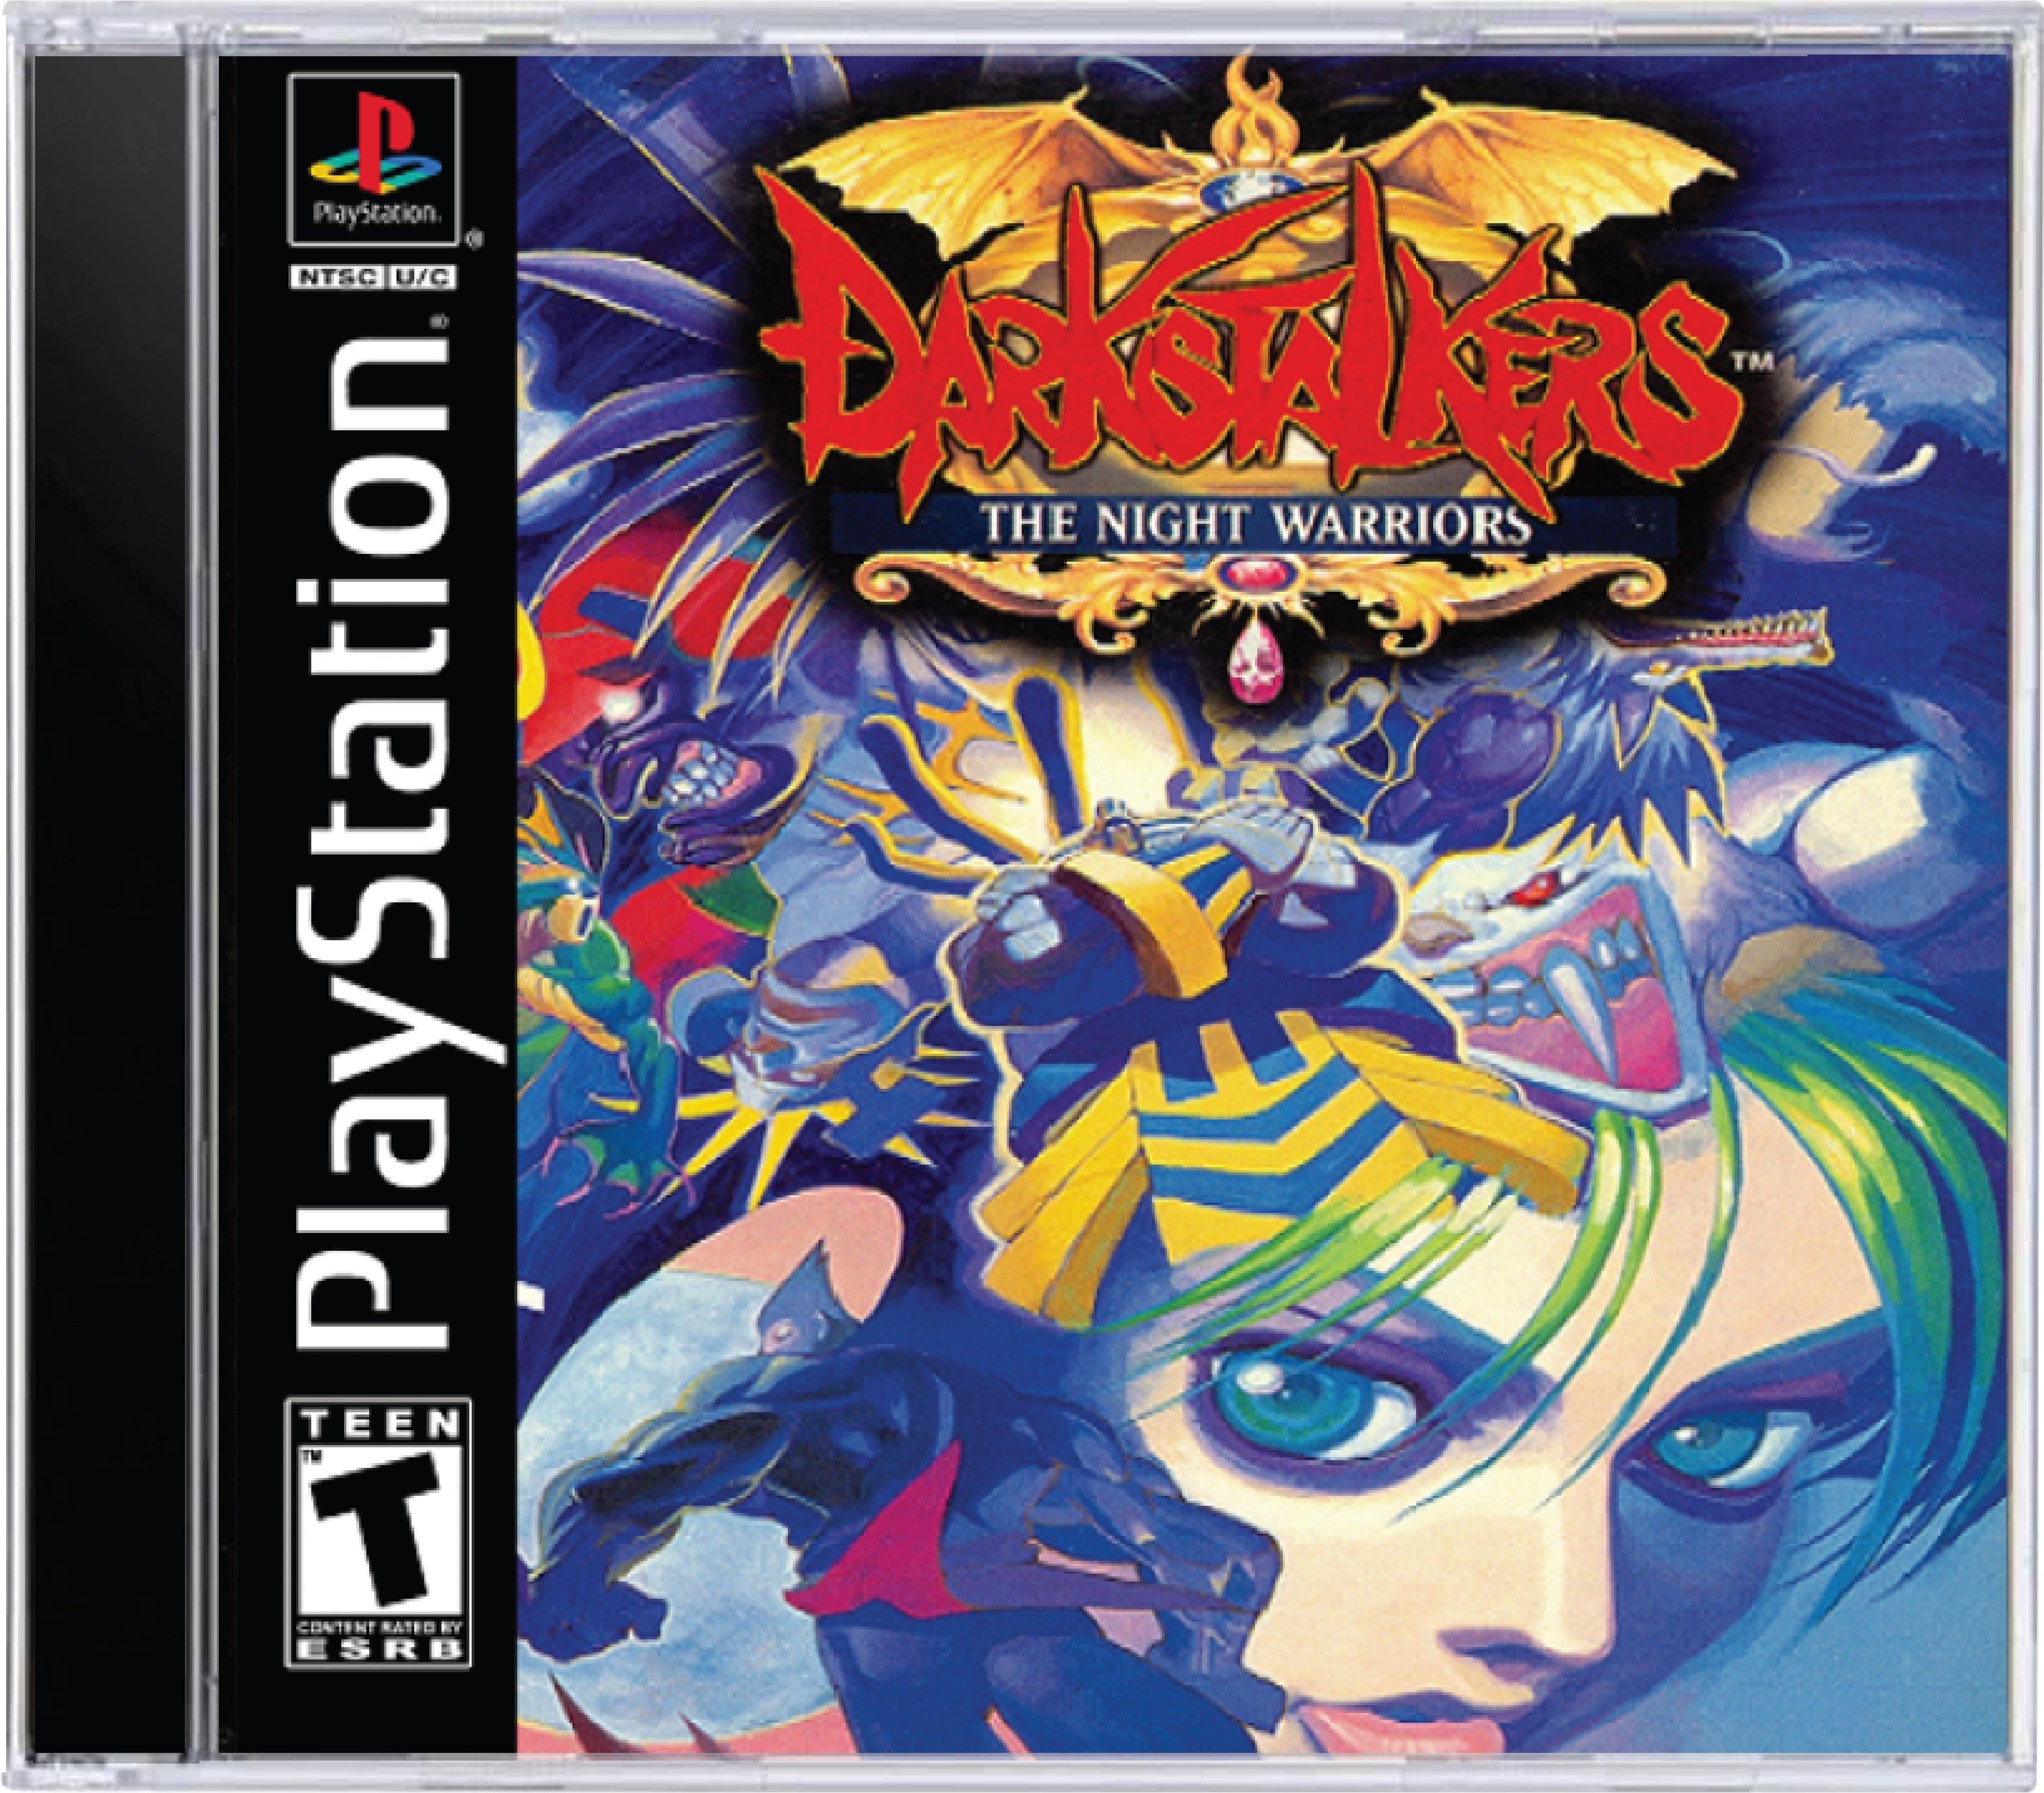 Darkstalkers The Night Warriors Cover Art and Product Photo